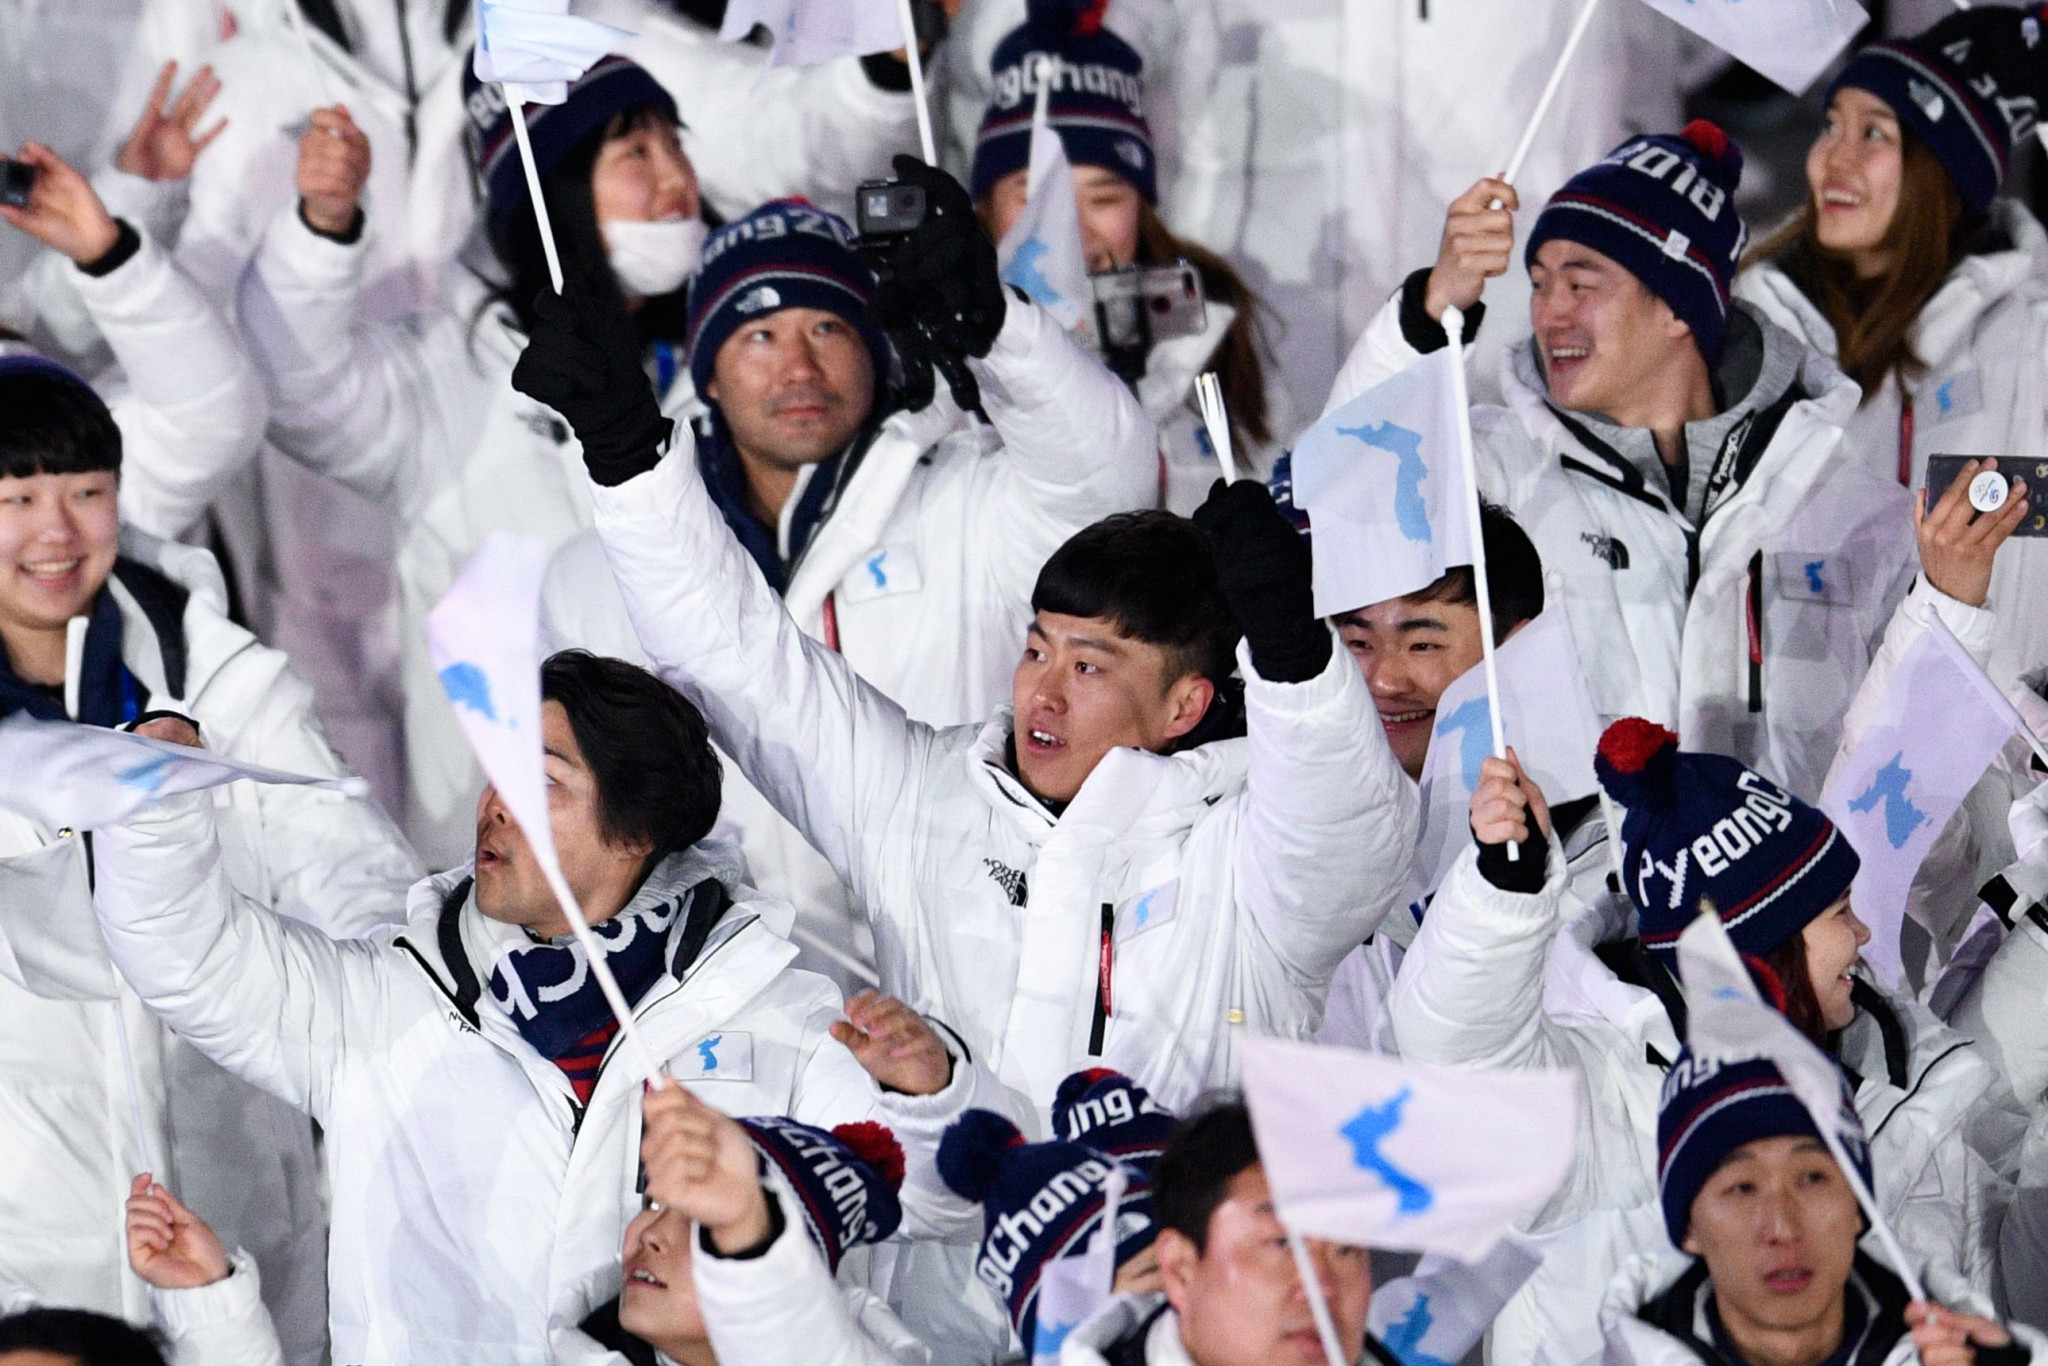 Koreas hoping to march together at Asian Games Opening Ceremony